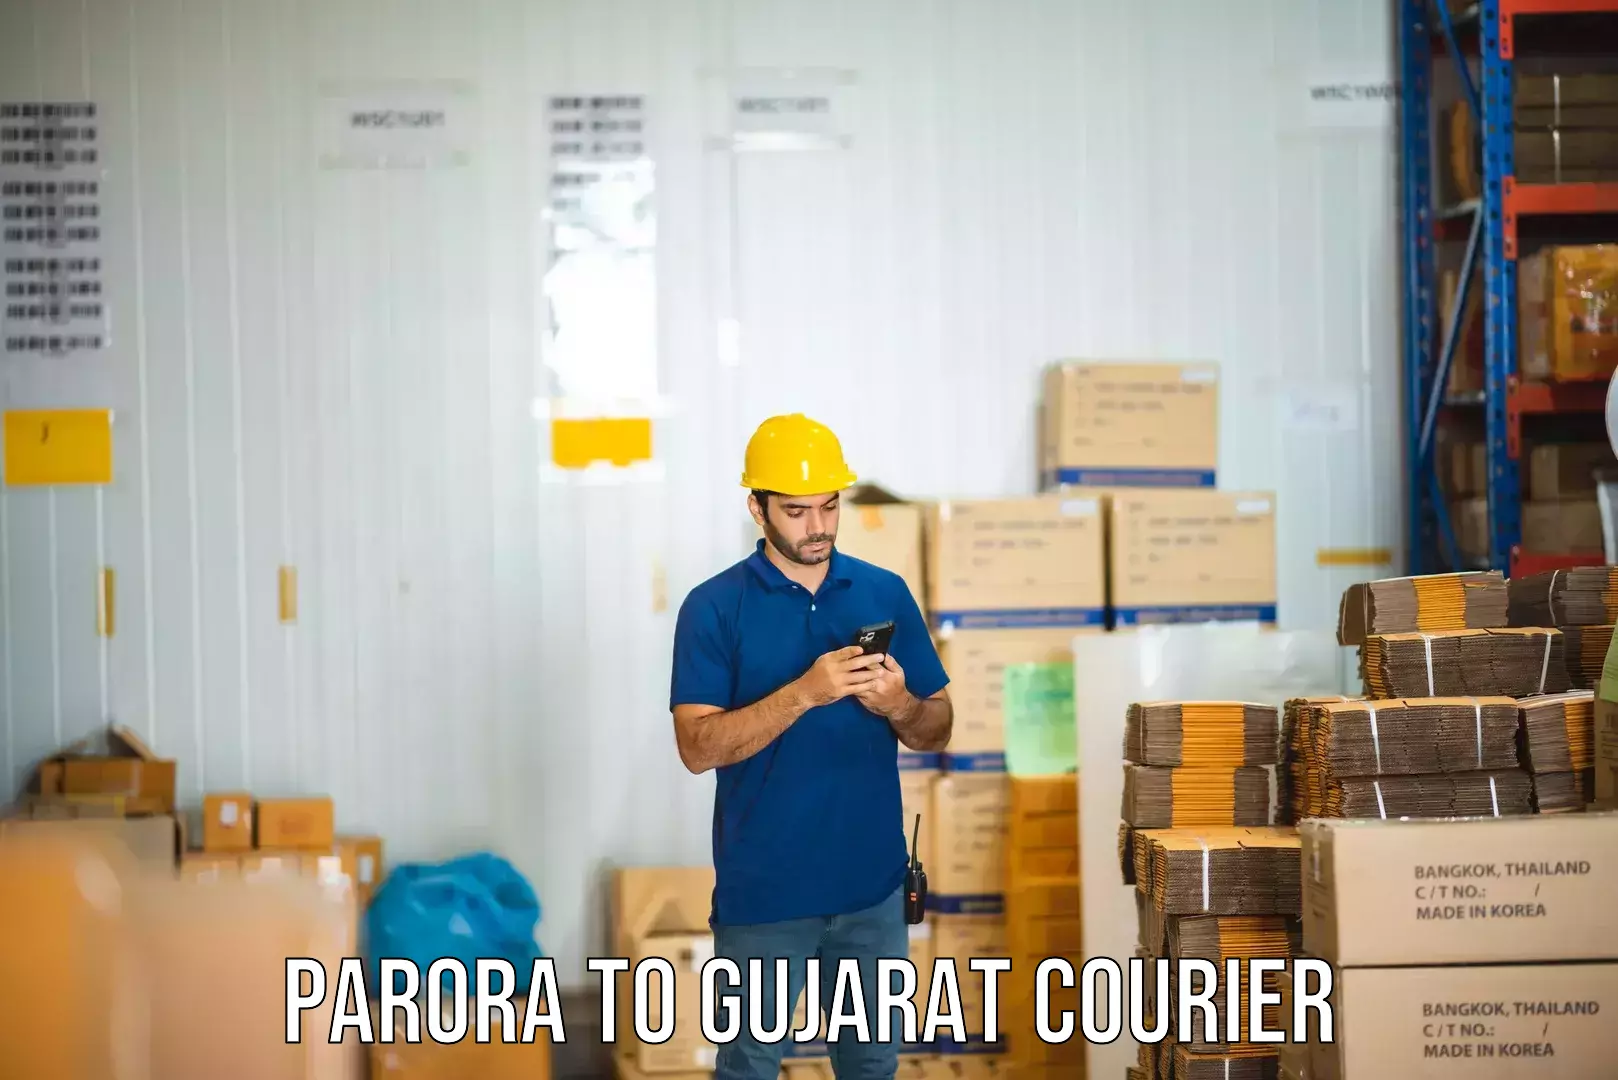 State-of-the-art courier technology Parora to Rapar